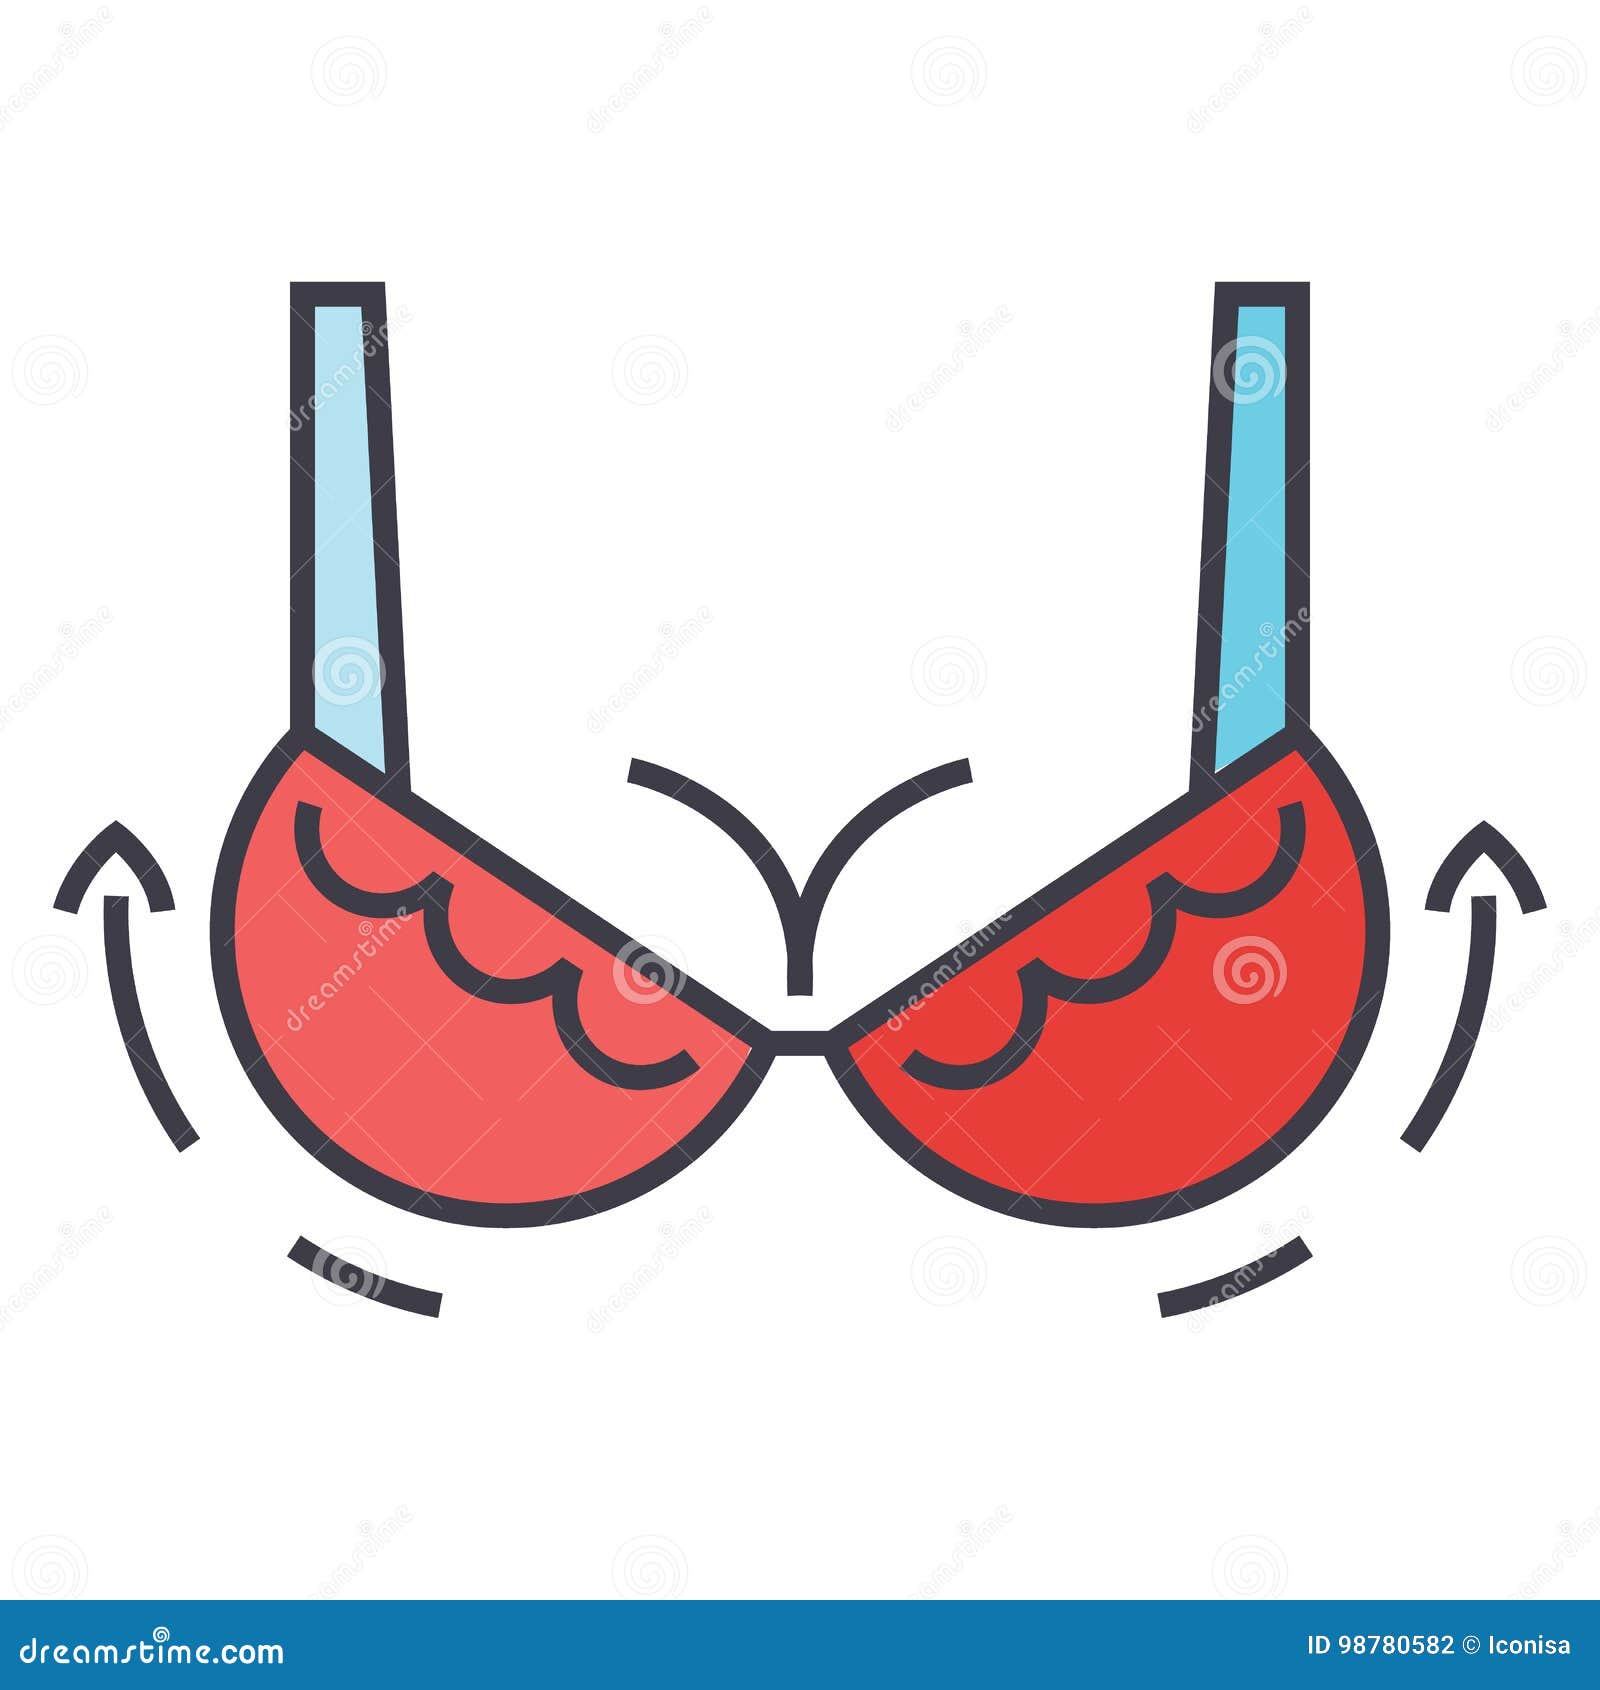 Female breast in a red bra icon, flat style 15090593 Vector Art at